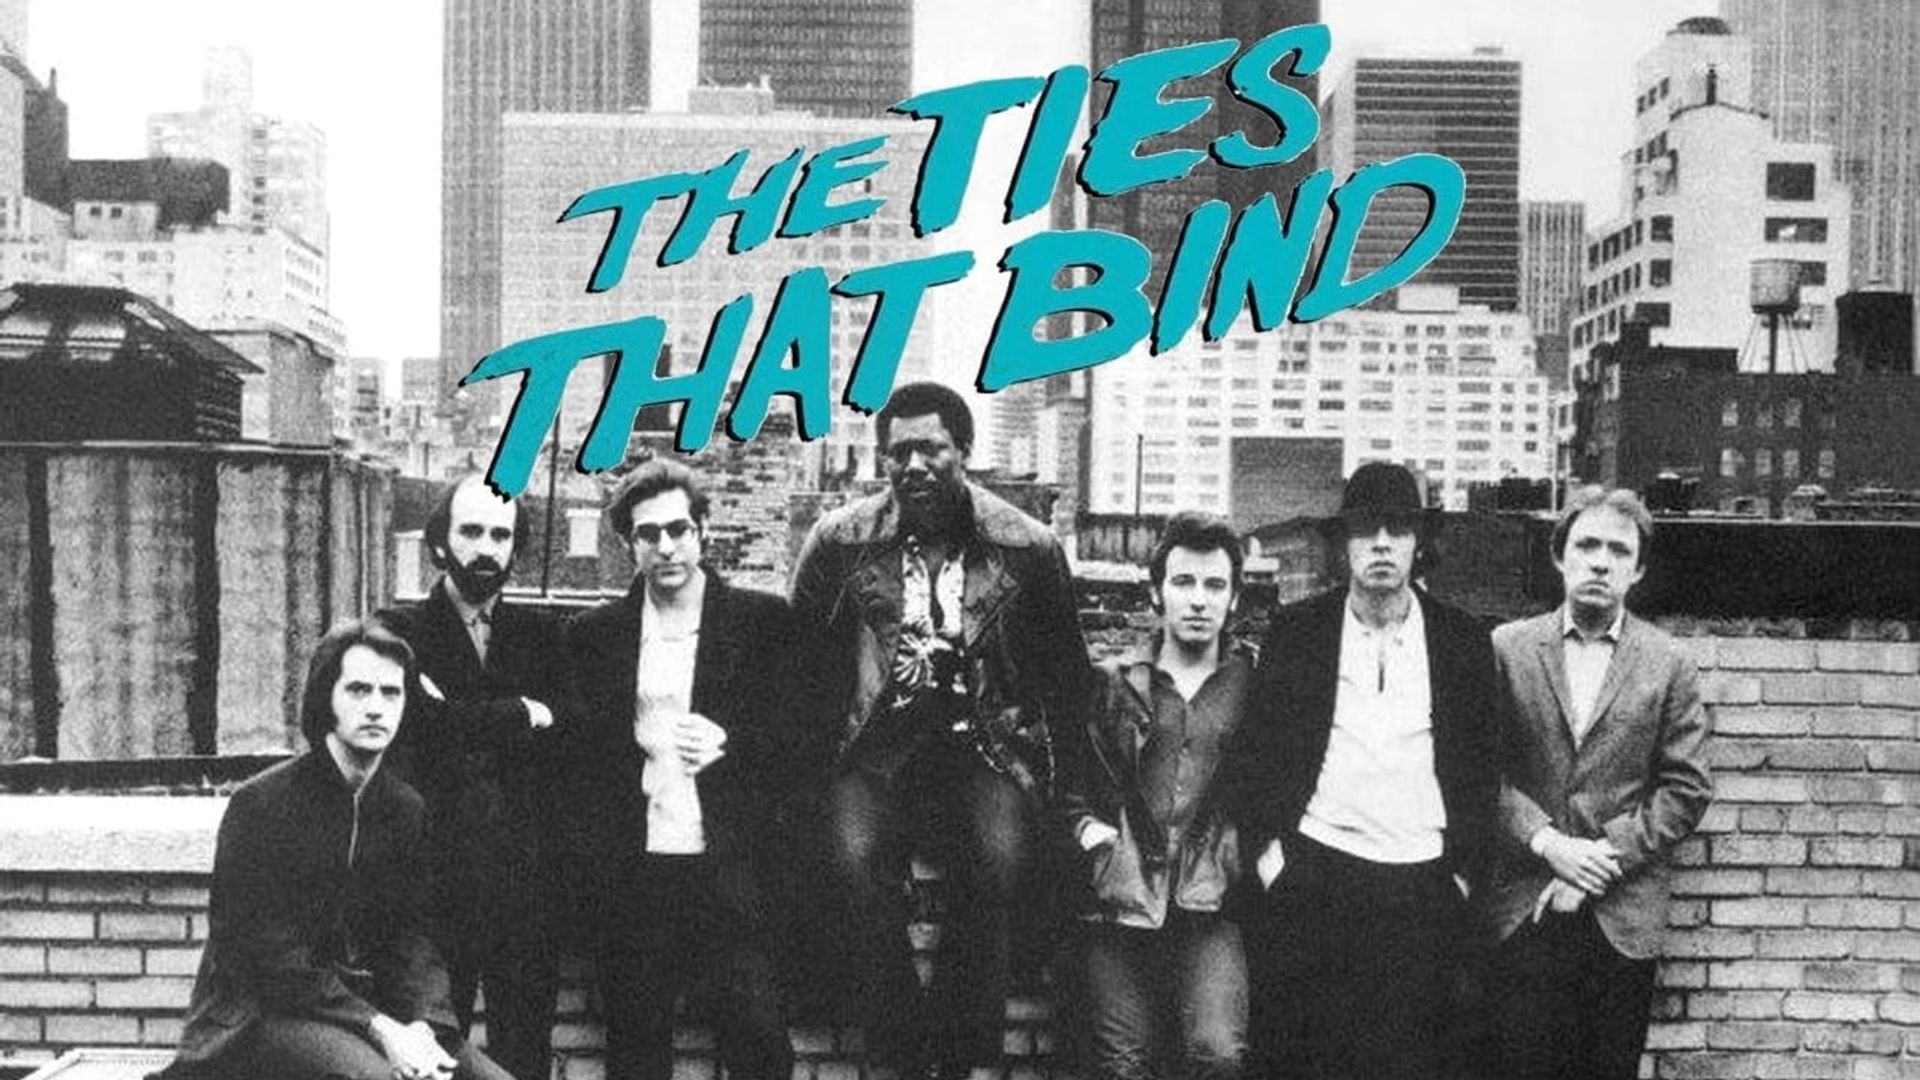 The Ties That Bind background